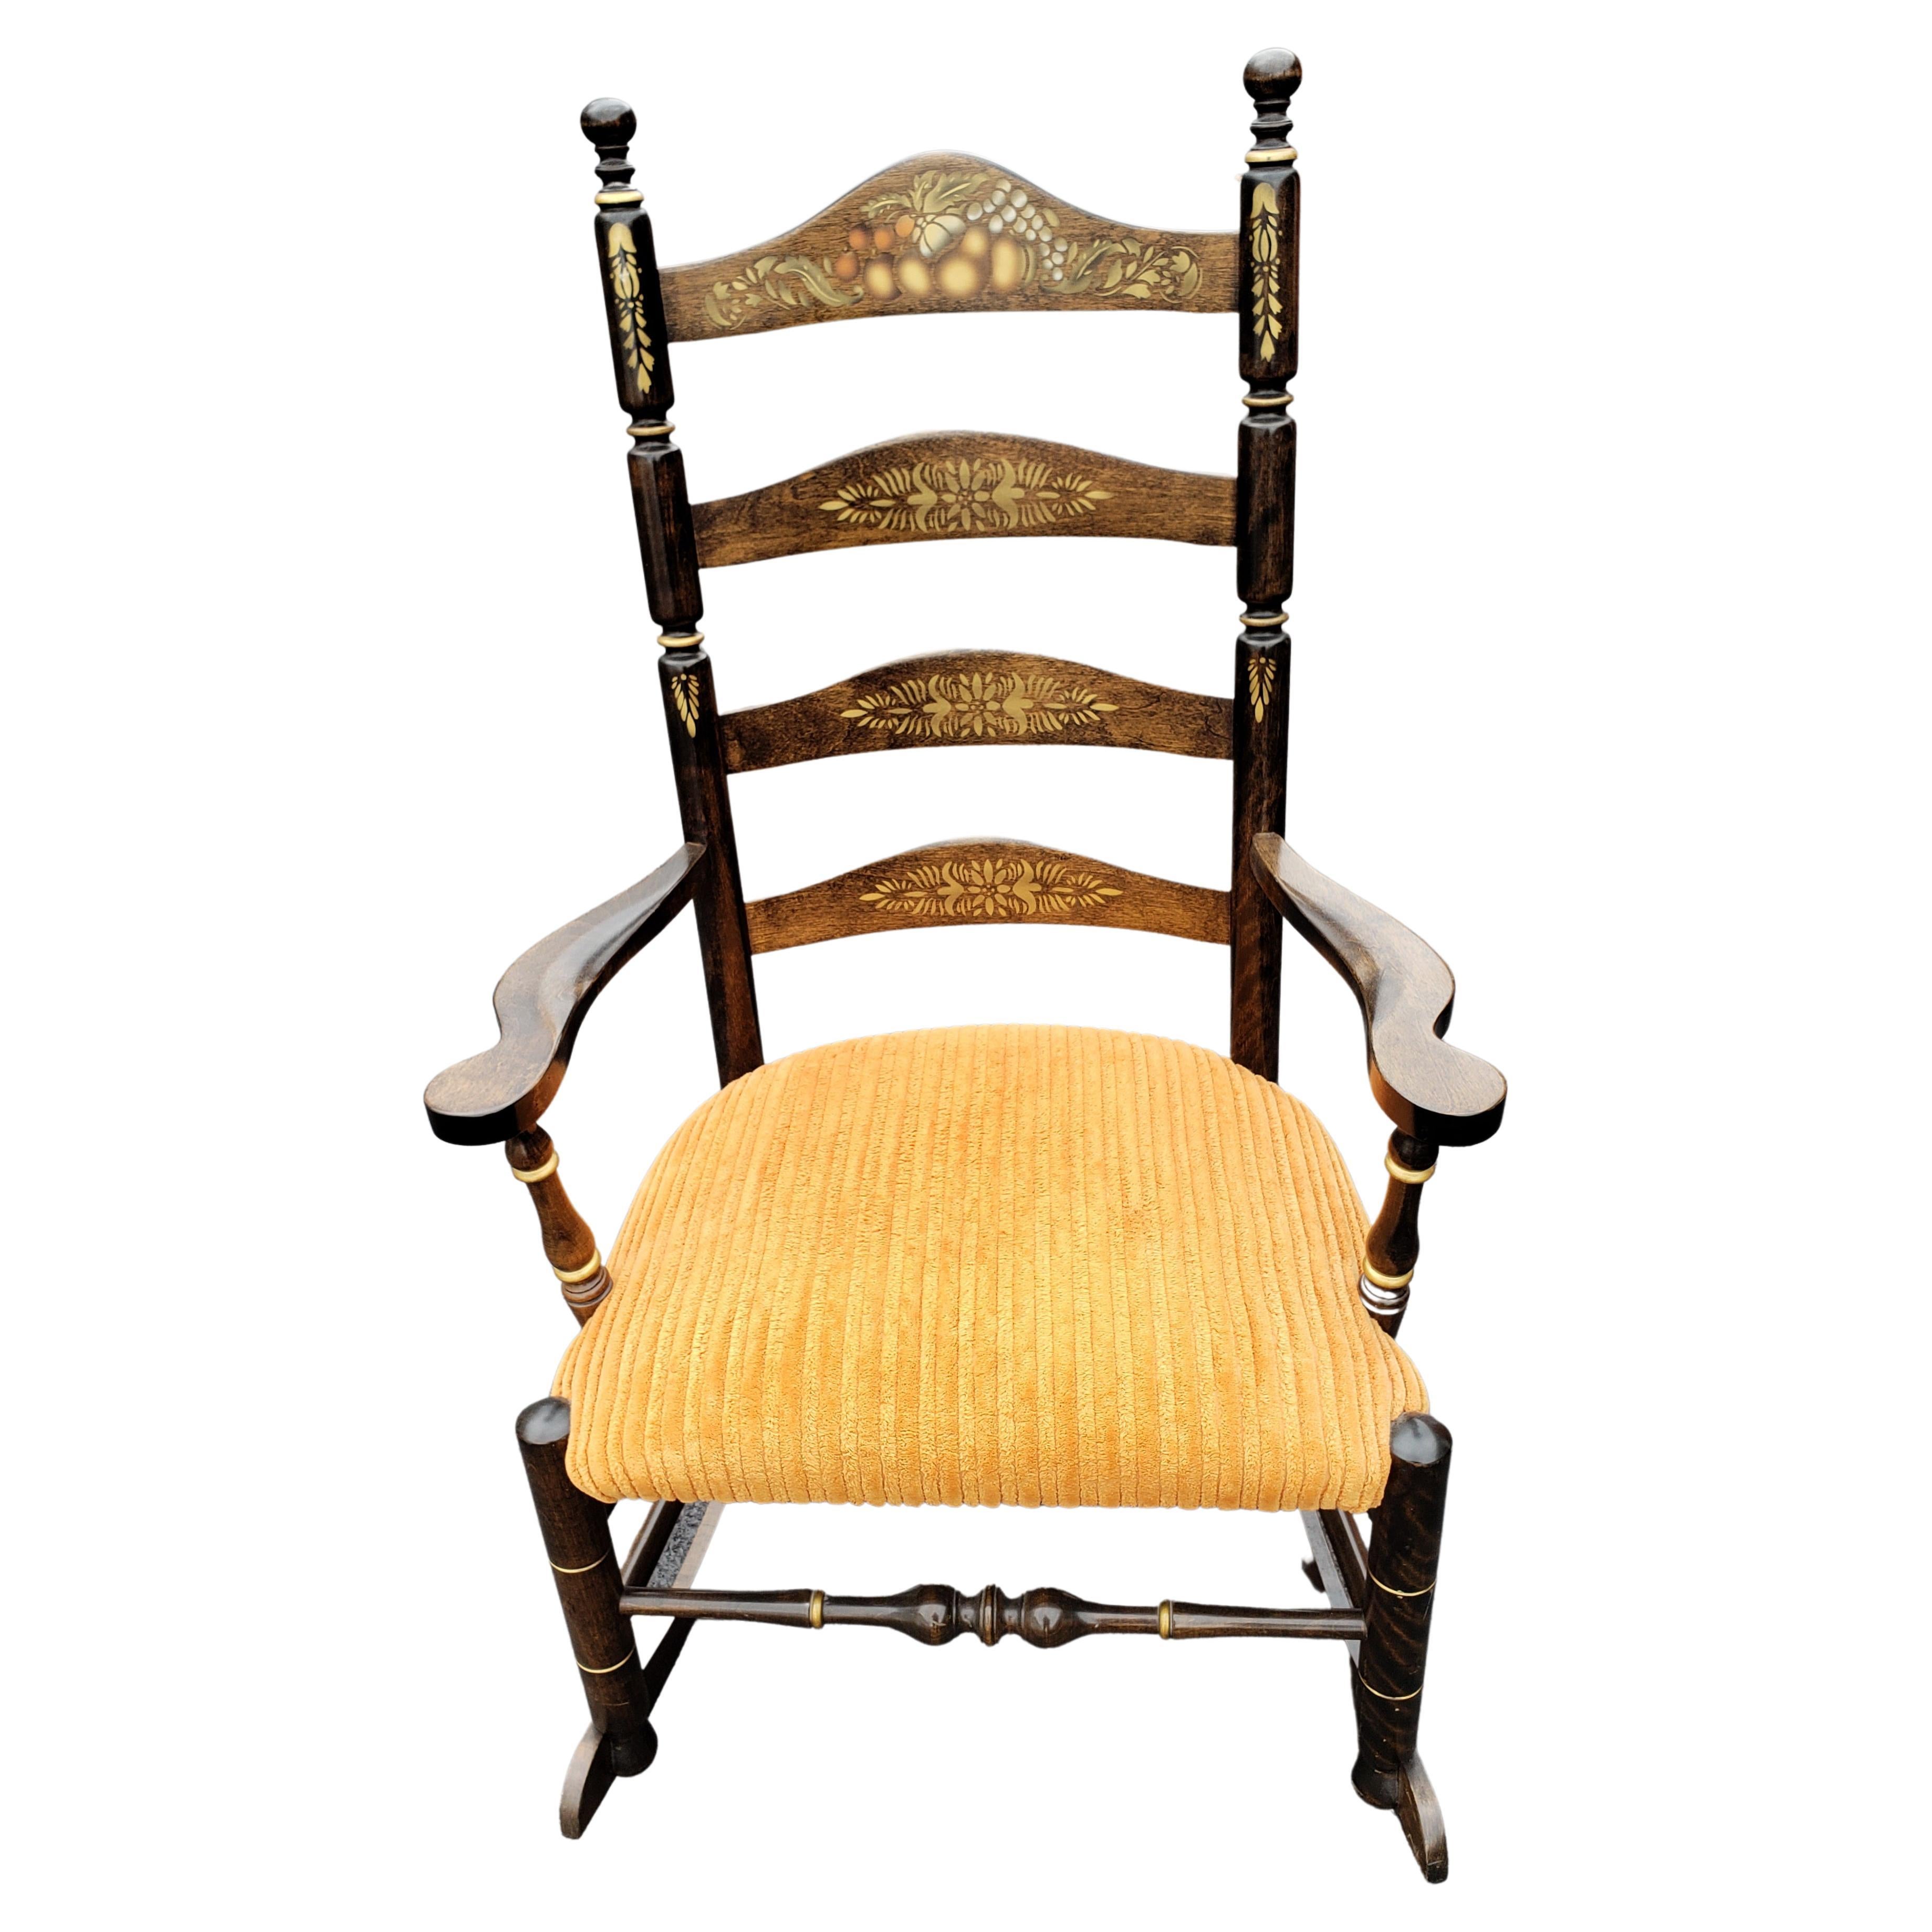 Nichols & Stone Hitchcock Style Rocking Chair in Honor of U.S. Gen. Thayer For Sale